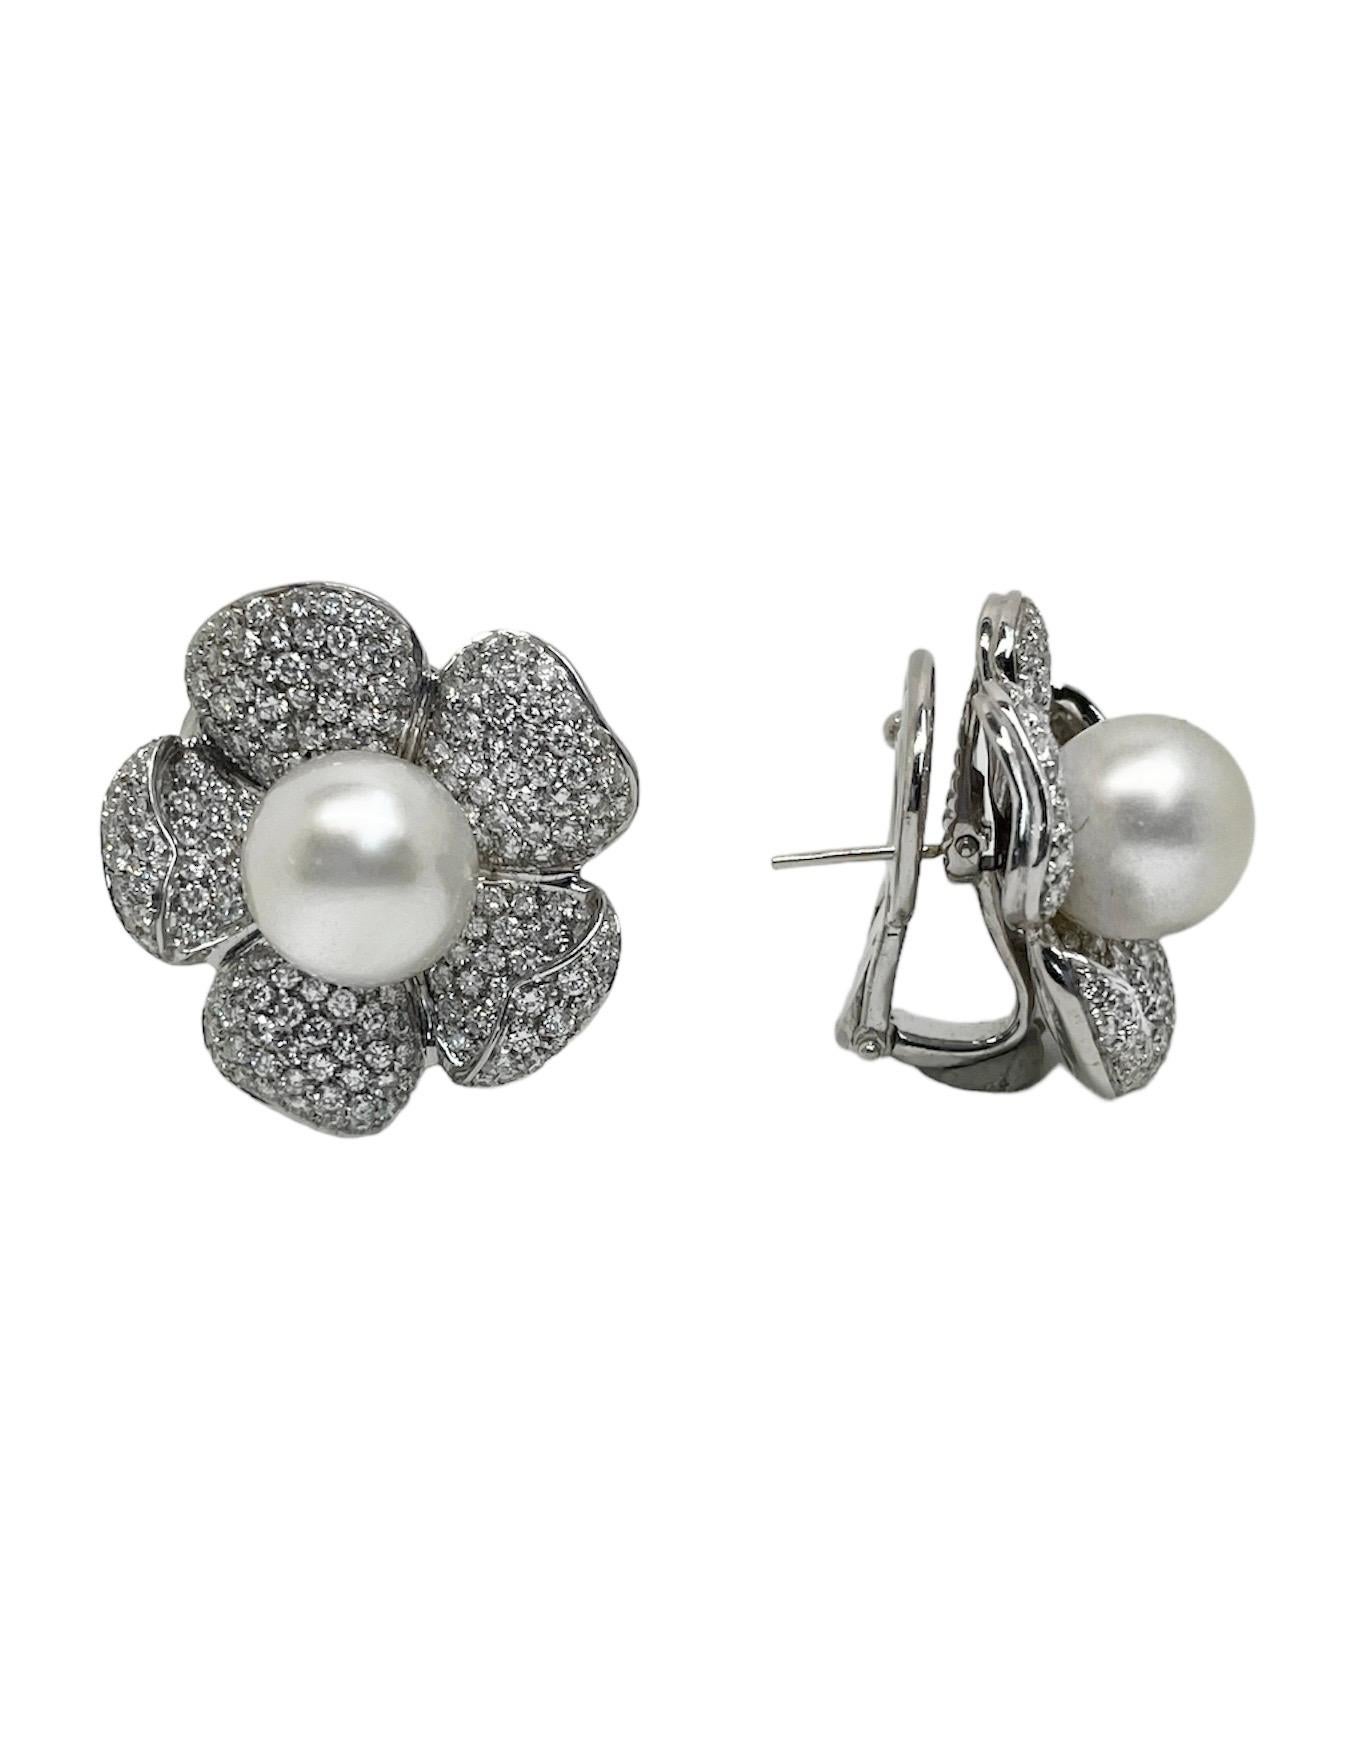 Contemporary Roberto Casarin, Cultured South Sea Pearl and Diamond Flower Earrings For Sale